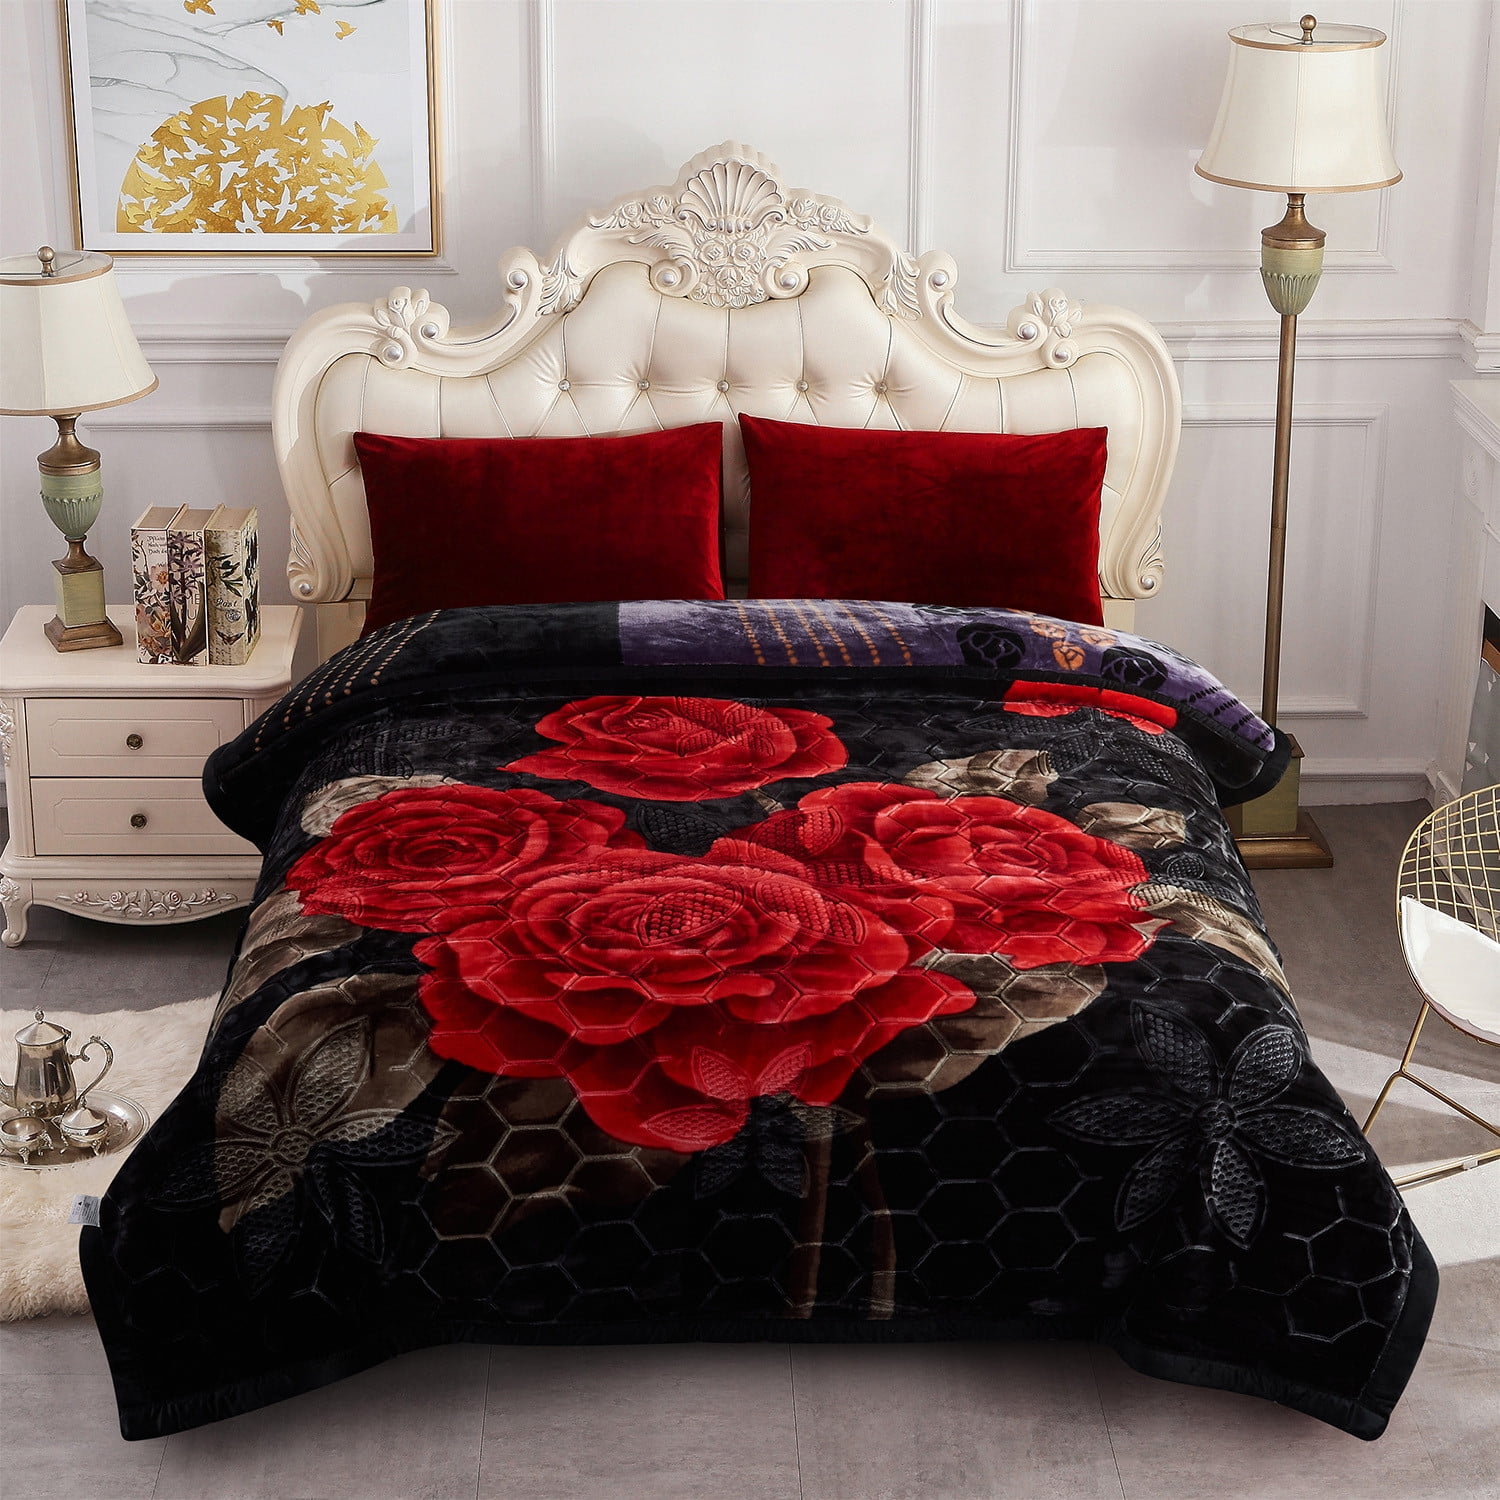 NC King Size Blanket 2 Ply Thick Warm Plush Bed Blanket for Winter, 10lbs, Black Floral, 85 inchx93 inch